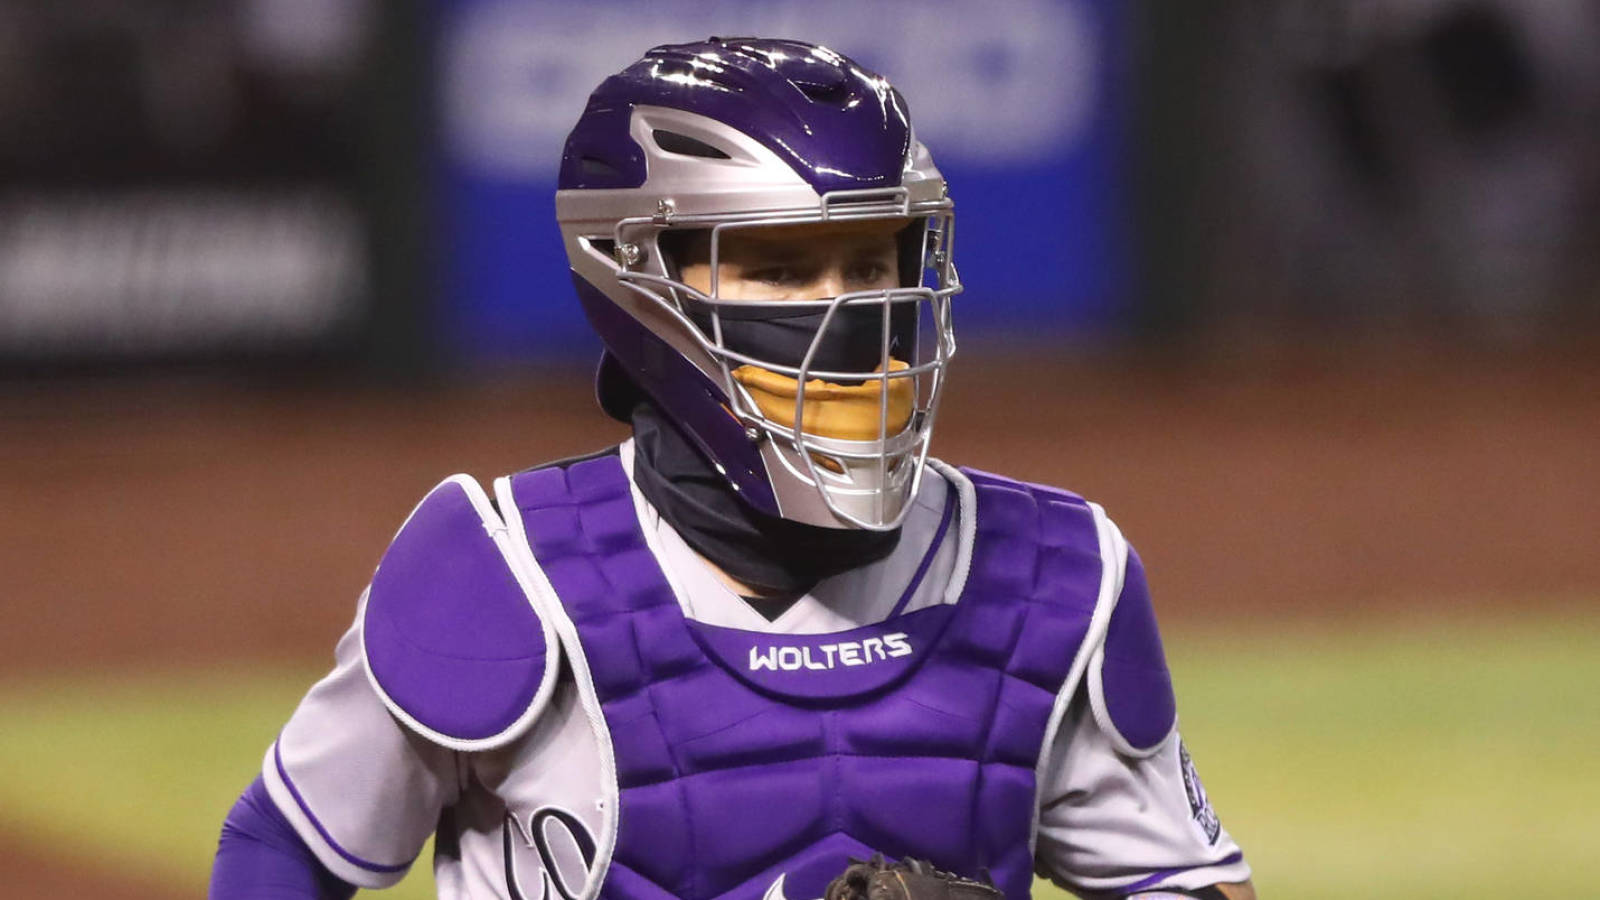 Pirates sign catcher Tony Wolters to minors deal | Yardbarker